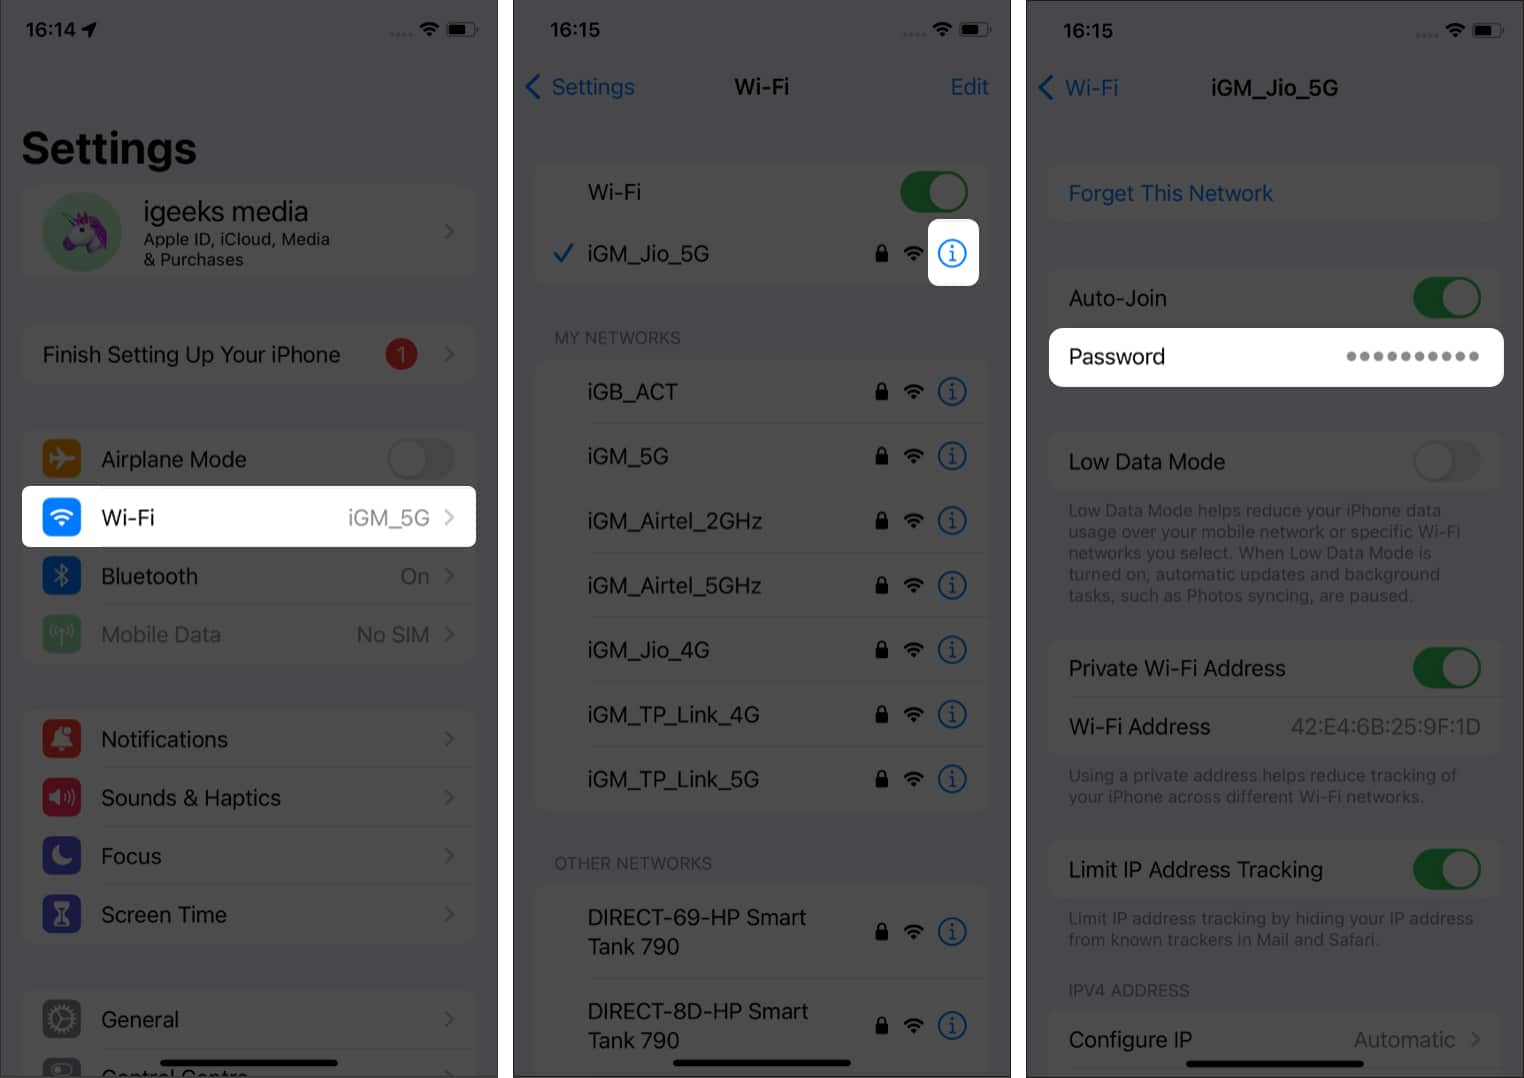 How to transfer Wi-Fi password directly from the Settings app in iOS 16